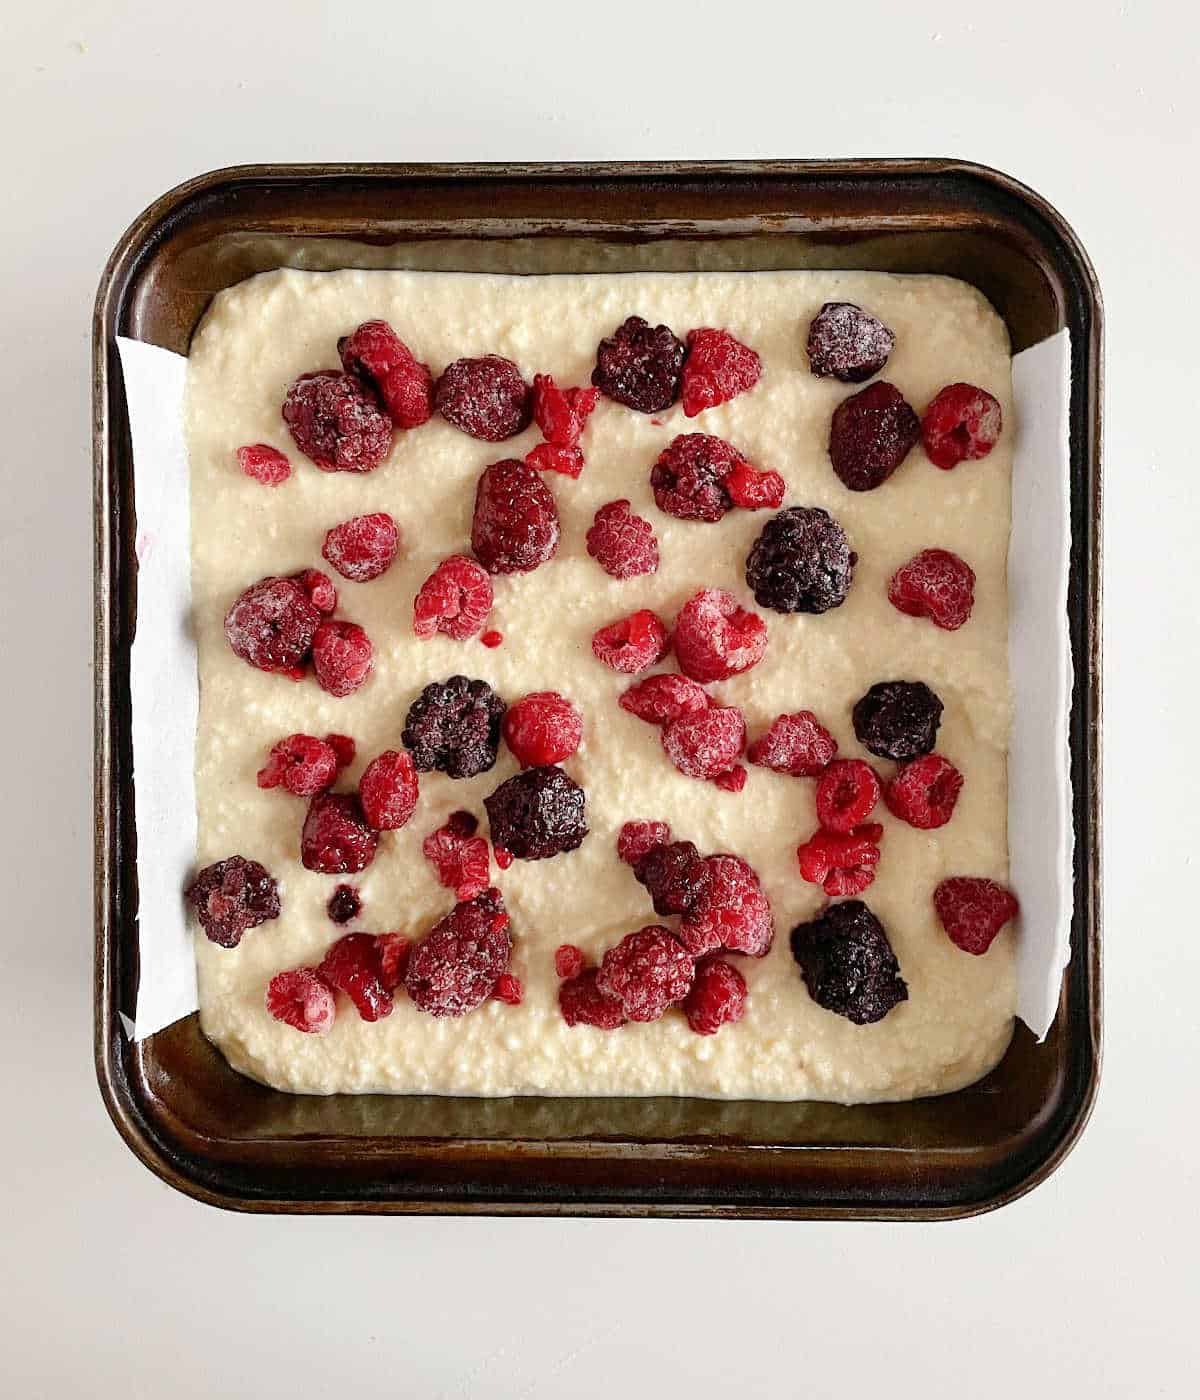 Dark metal square pan on grey surface with unbaked berry ricotta cake mixture.